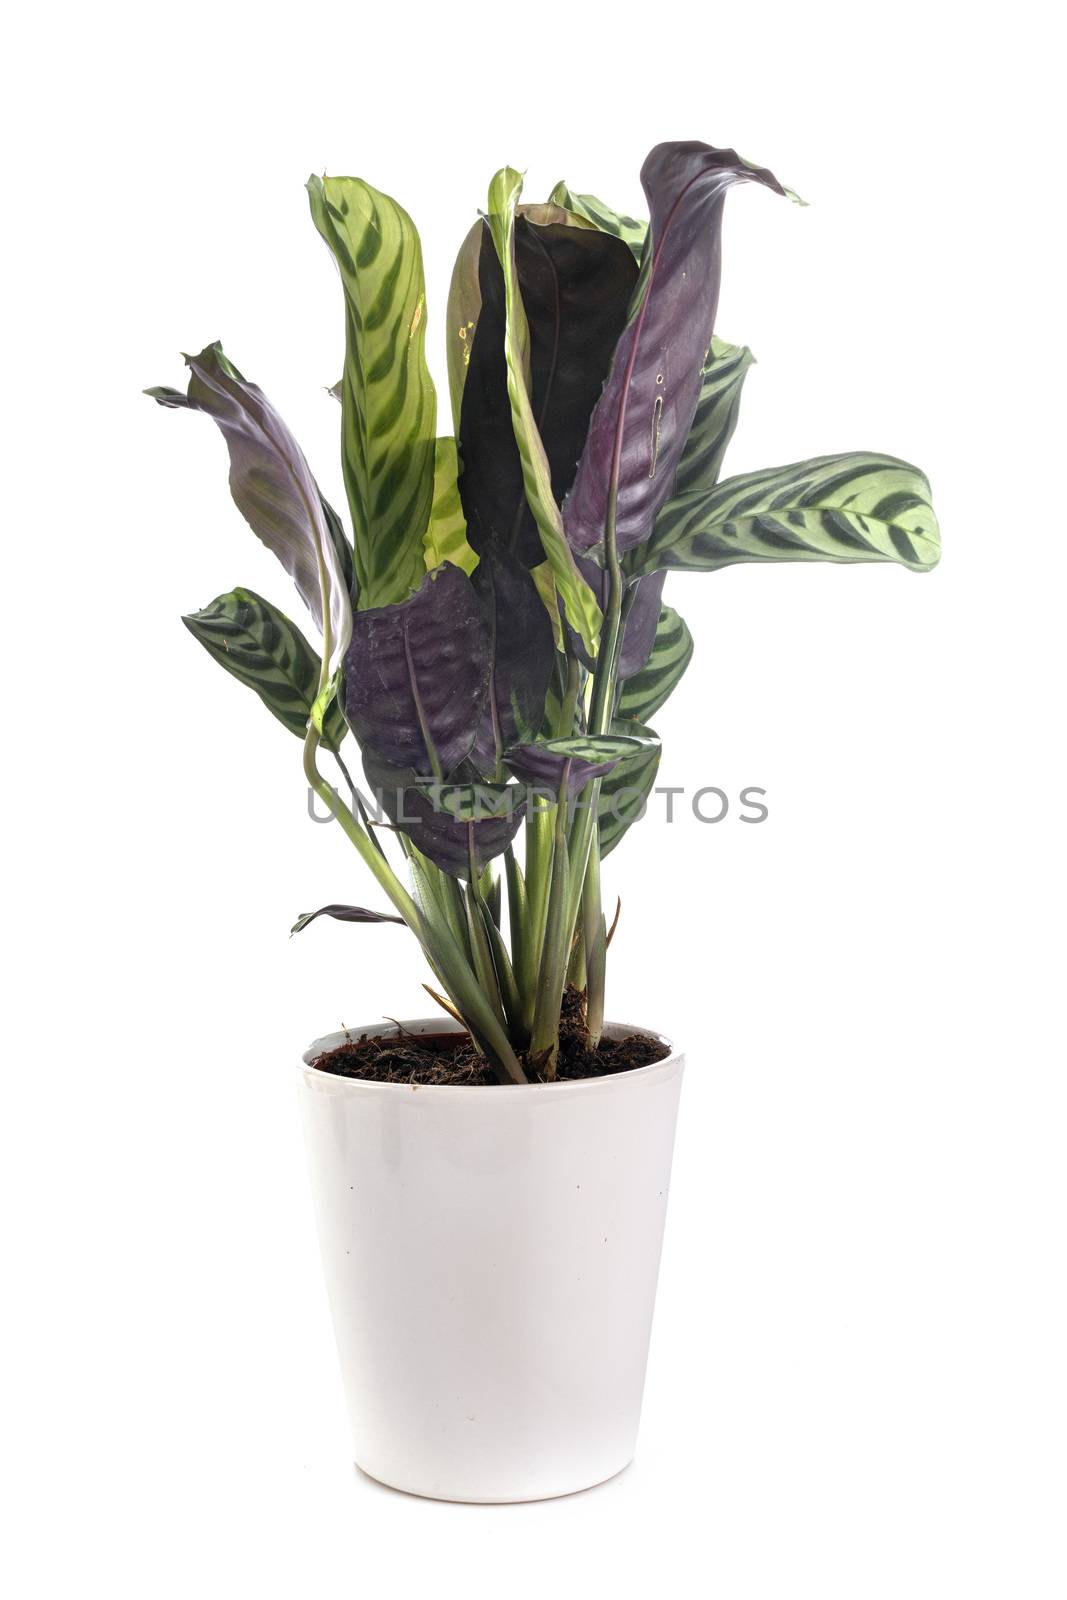 Calathea plant in front of white background